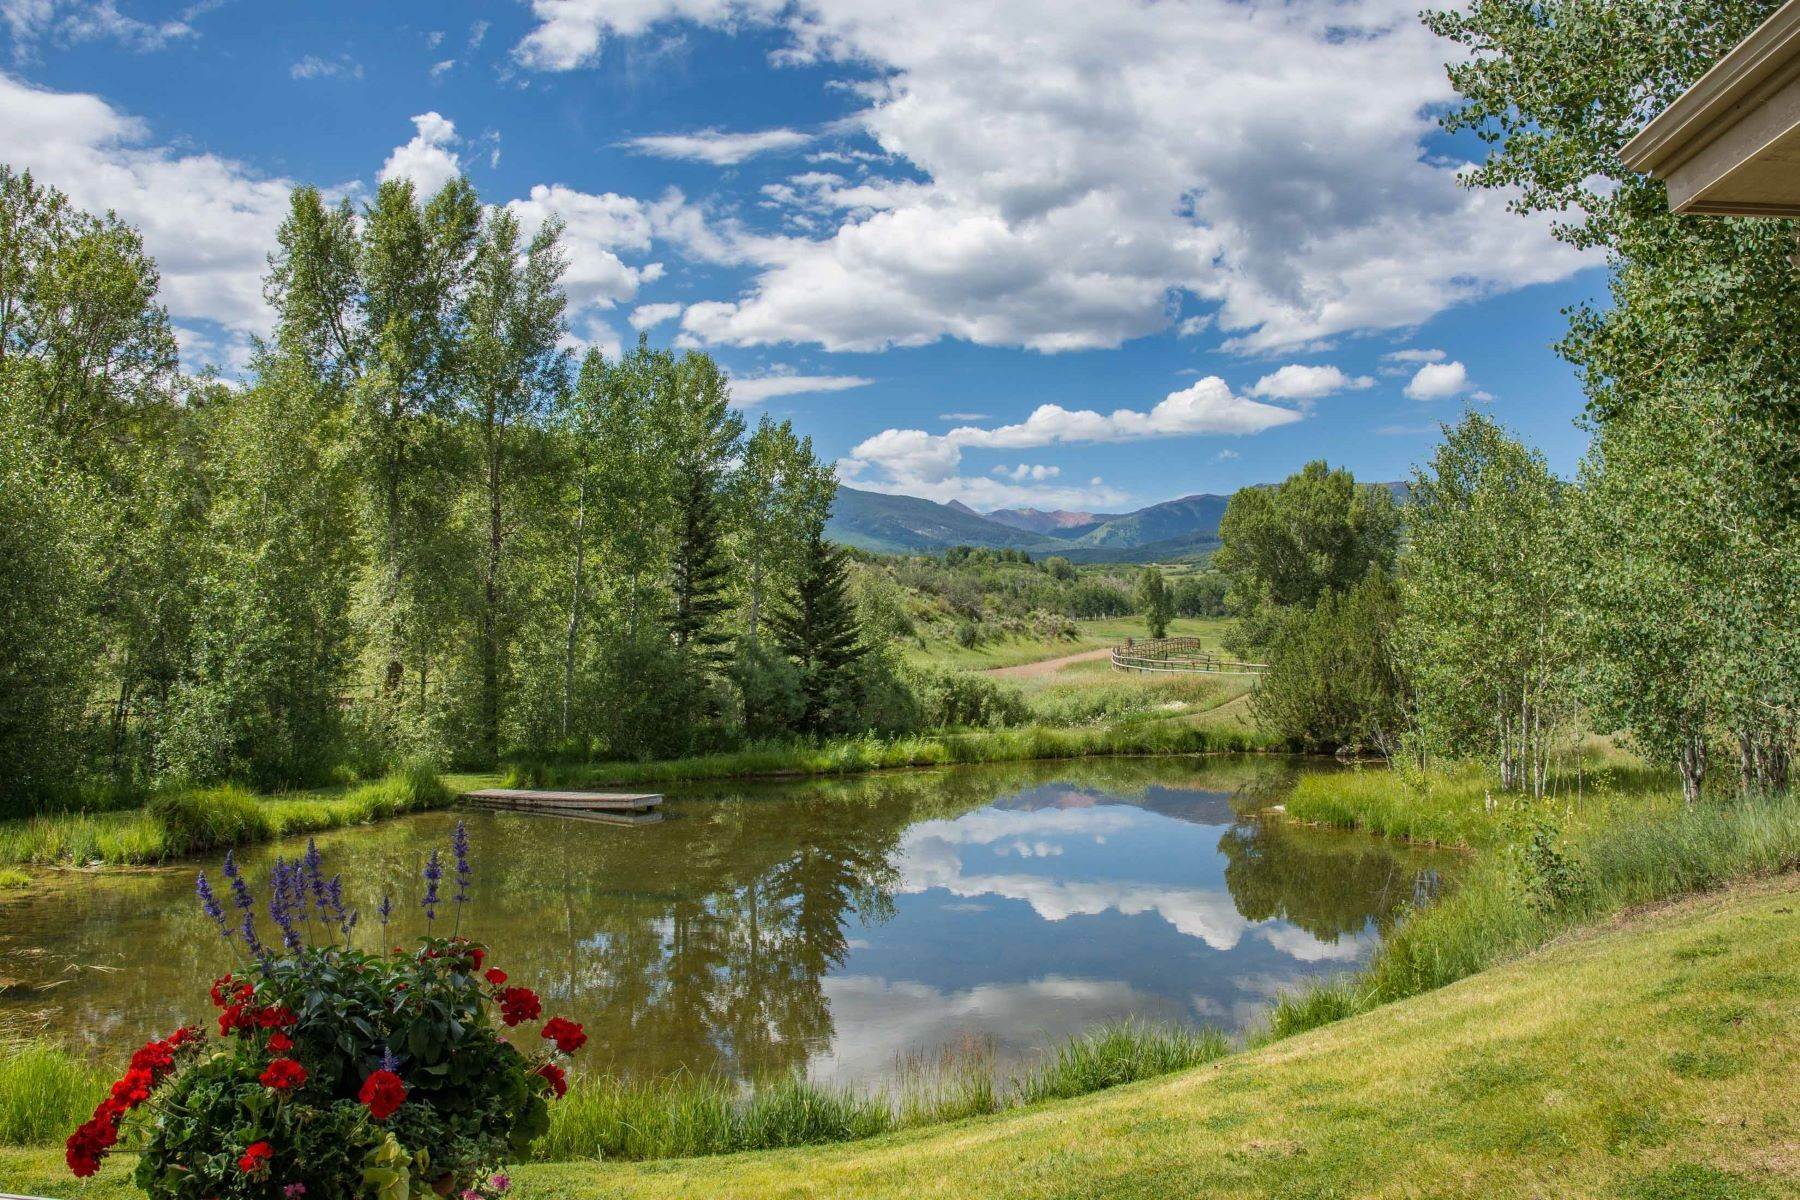 Farm and Ranch Properties for Sale at RARE and UNIQUE opportunity to own the heart of the renowned McCabe Ranch! 1321 Elk Creek & TBD McCabe Ranch, Old Snowmass, Colorado 81654 United States